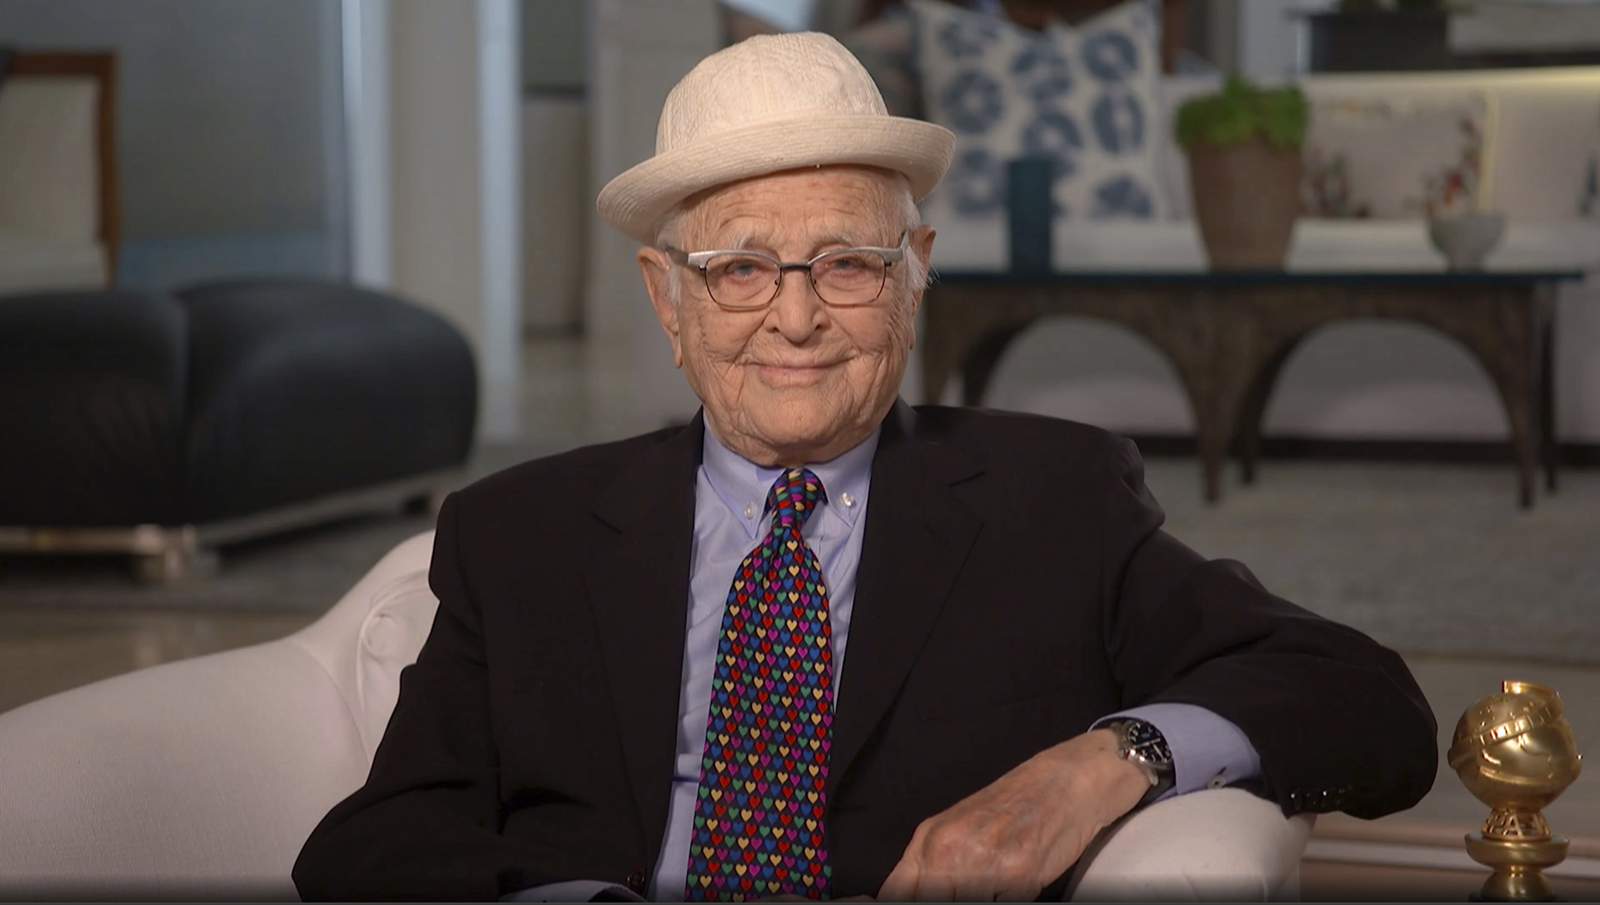 TV legend Norman Lear credits journey to laughter, family